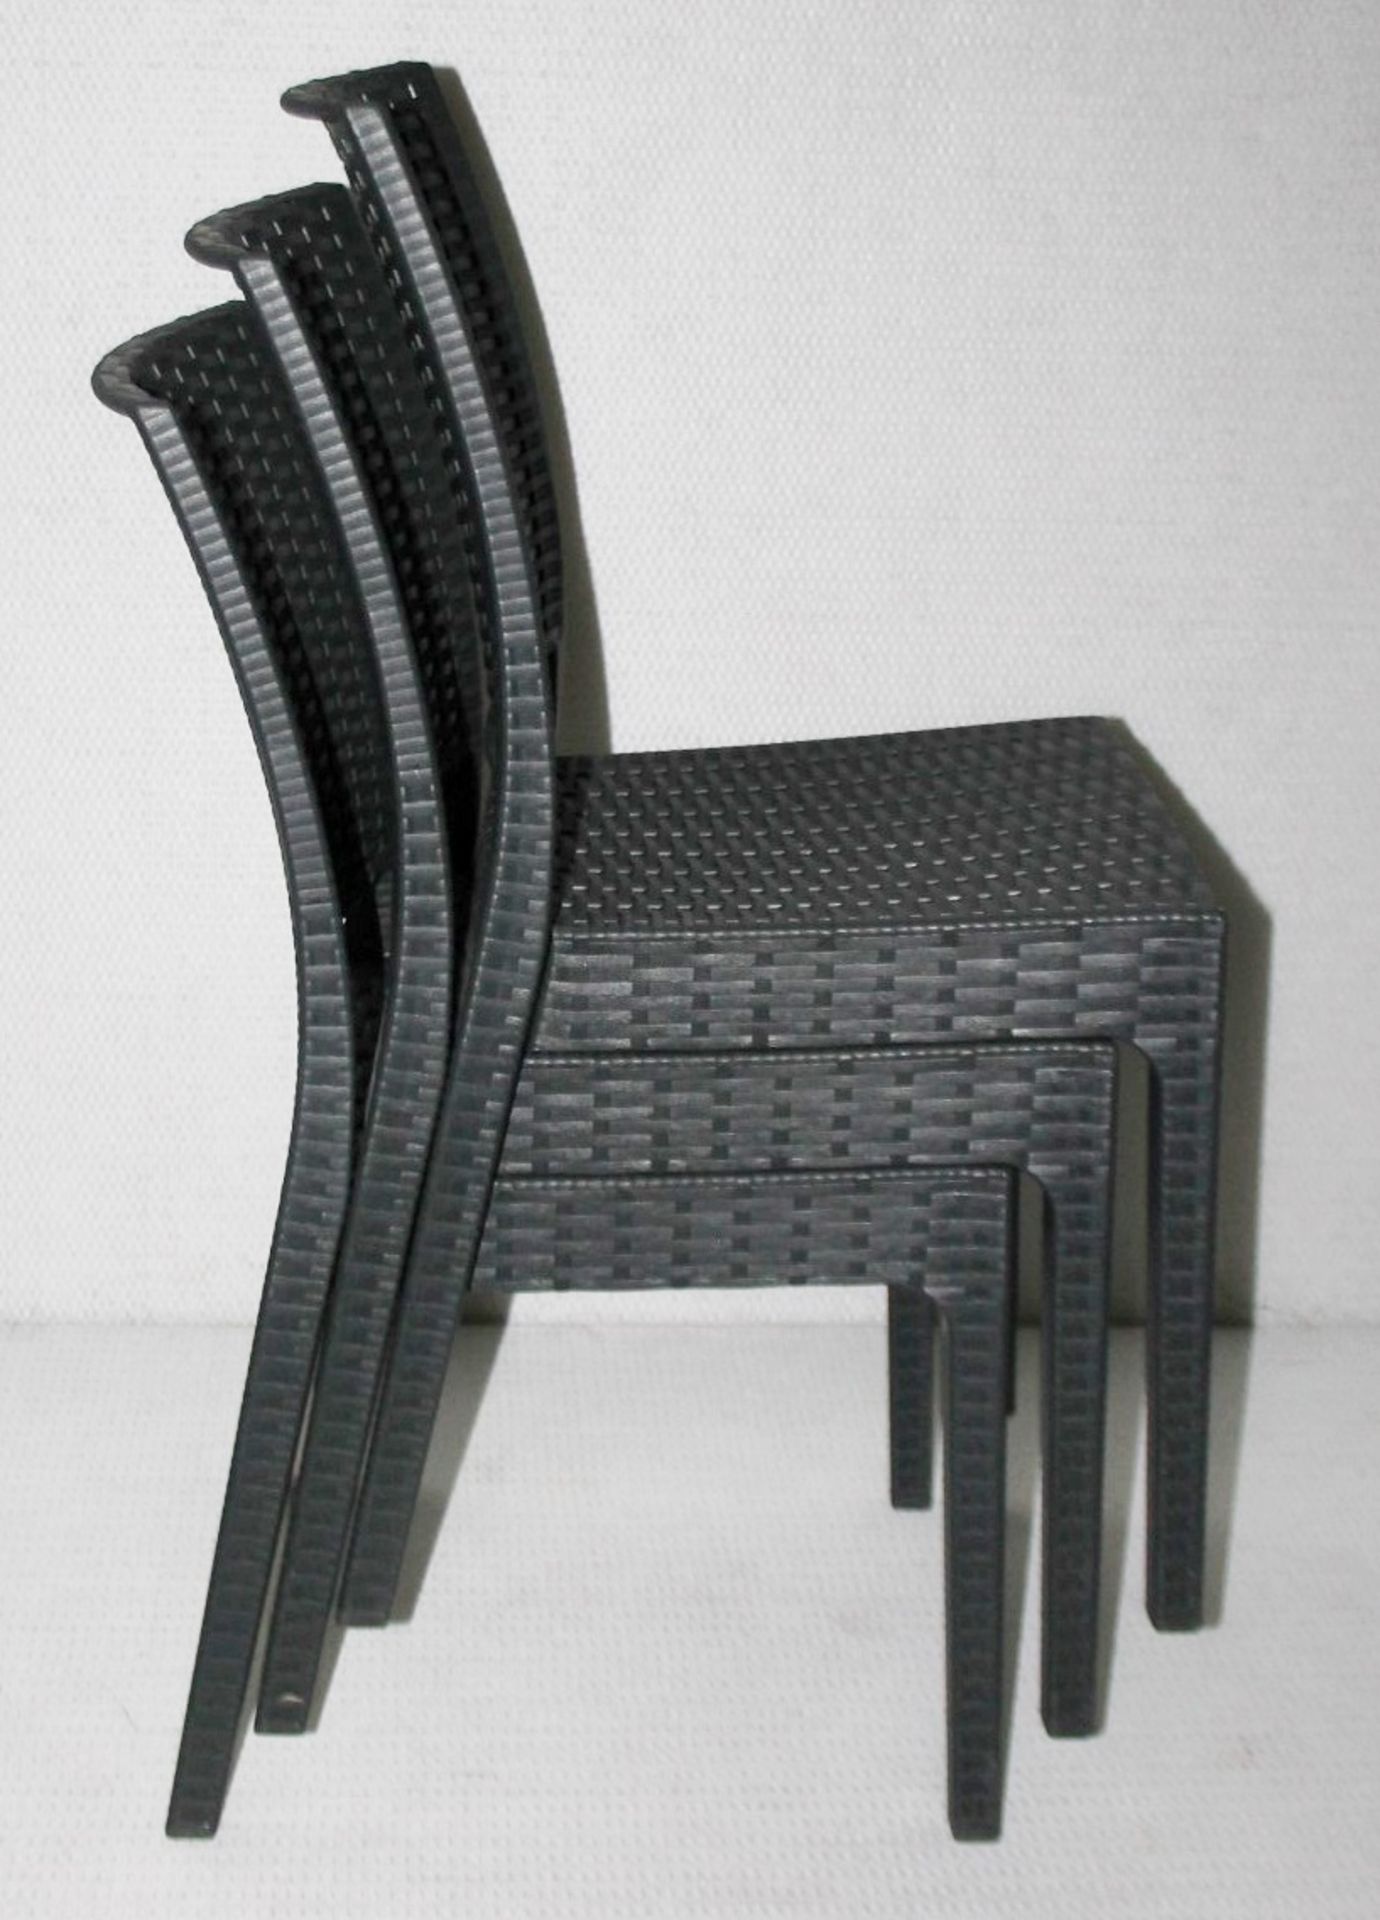 4 x SIESTA EXCLUSIVE 'Florida' Commercial Stackable Rattan-style Chairs In Dark Grey - RRP £320.00 - Image 6 of 13